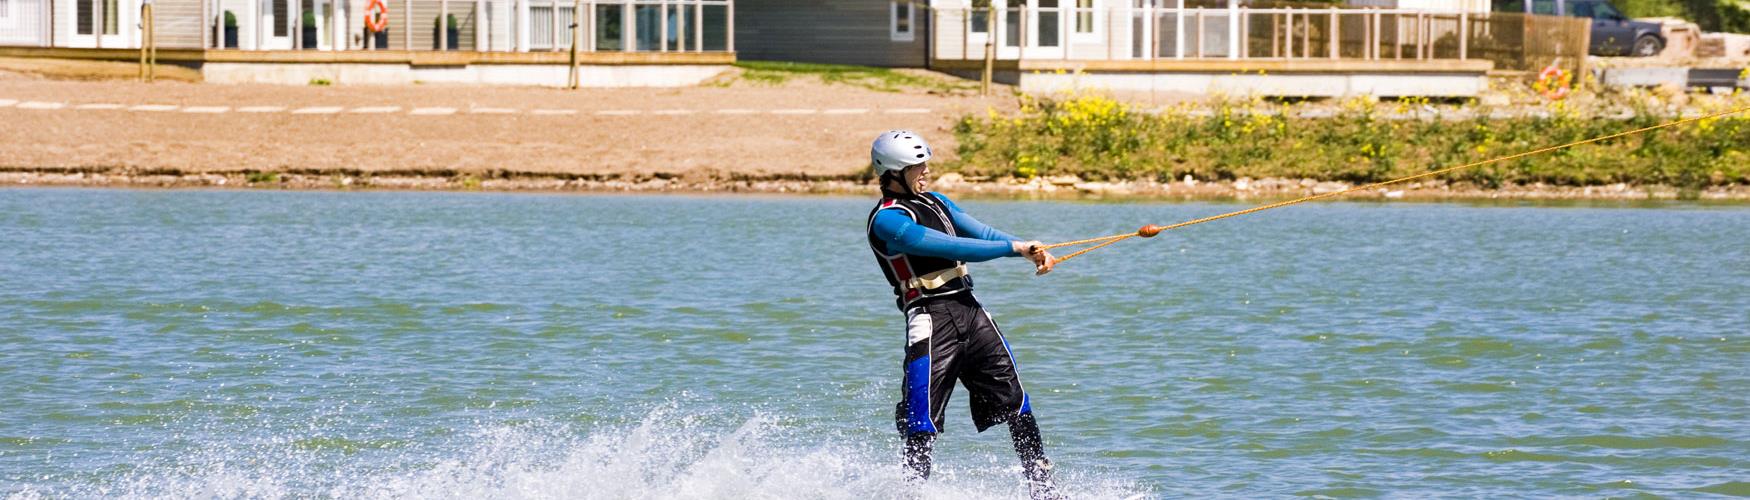 Watersports at Cotswold Water Park